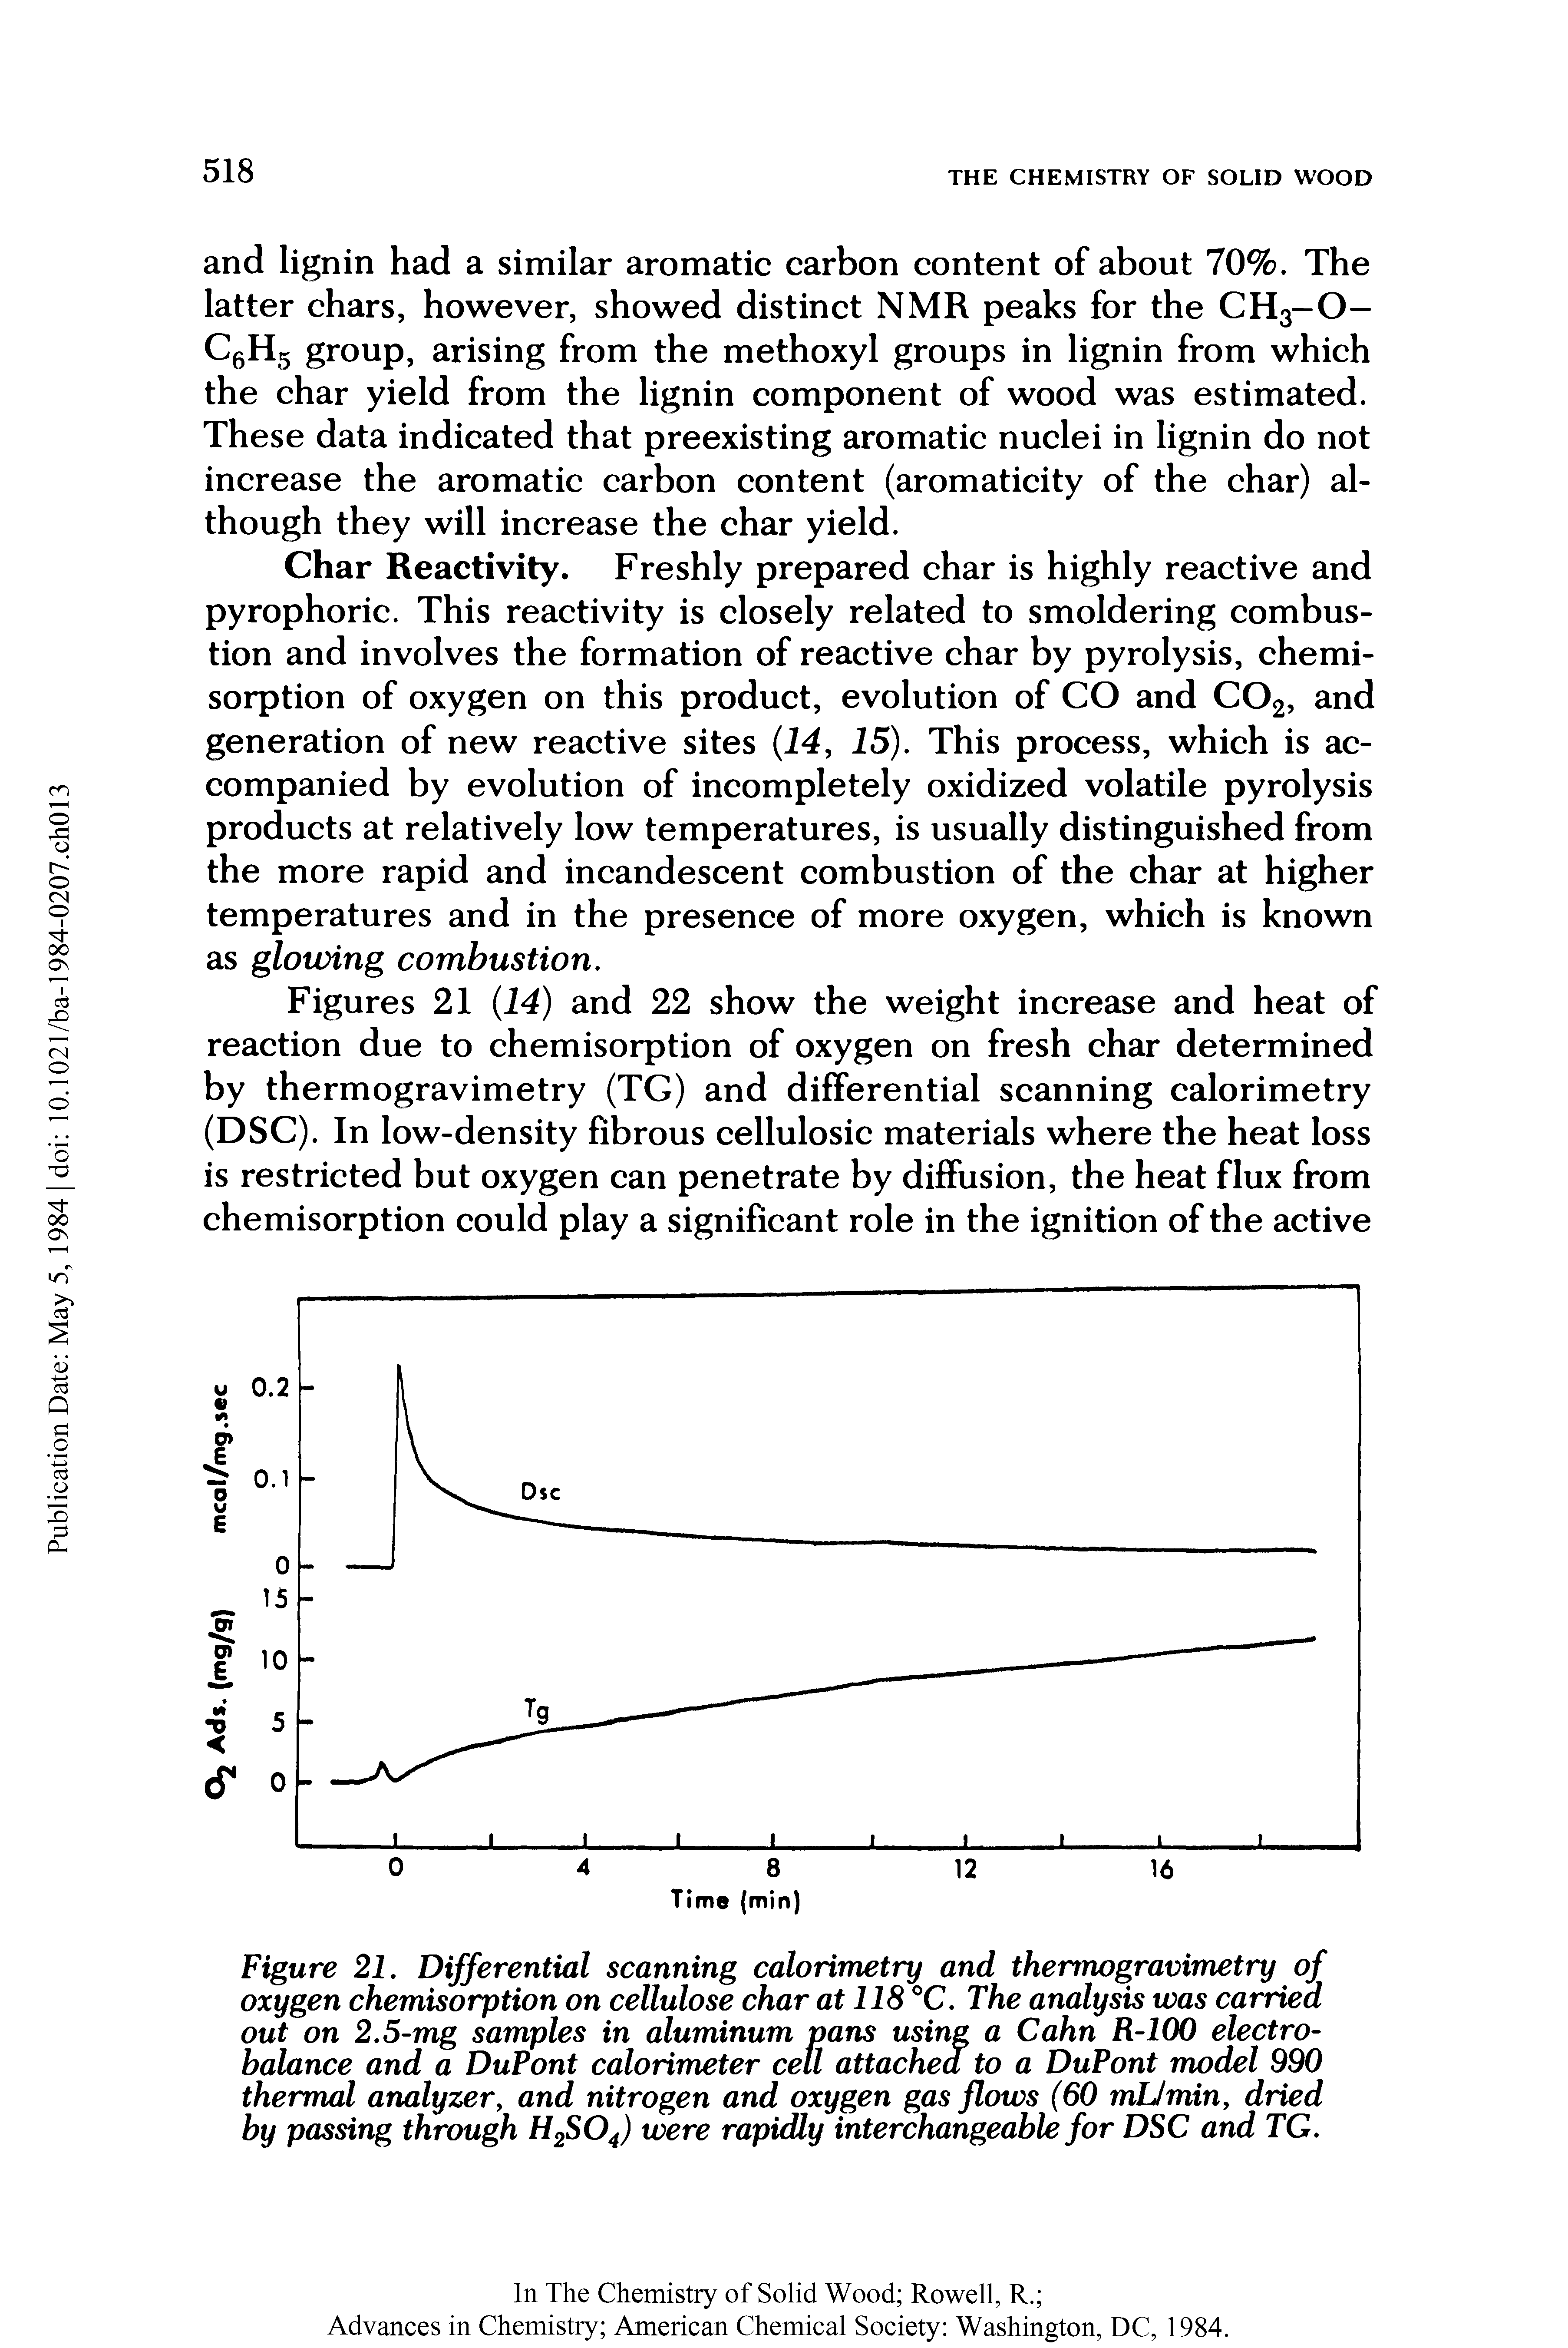 Figures 21 14) and 22 show the weight increase and heat of reaction due to chemisorption of oxygen on fresh char determined by thermogravimetry (TG) and differential scanning calorimetry (DSC). In low-density fibrous cellulosic materials where the heat loss is restricted but oxygen can penetrate by diffusion, the heat flux from chemisorption could play a significant role in the ignition of the active...